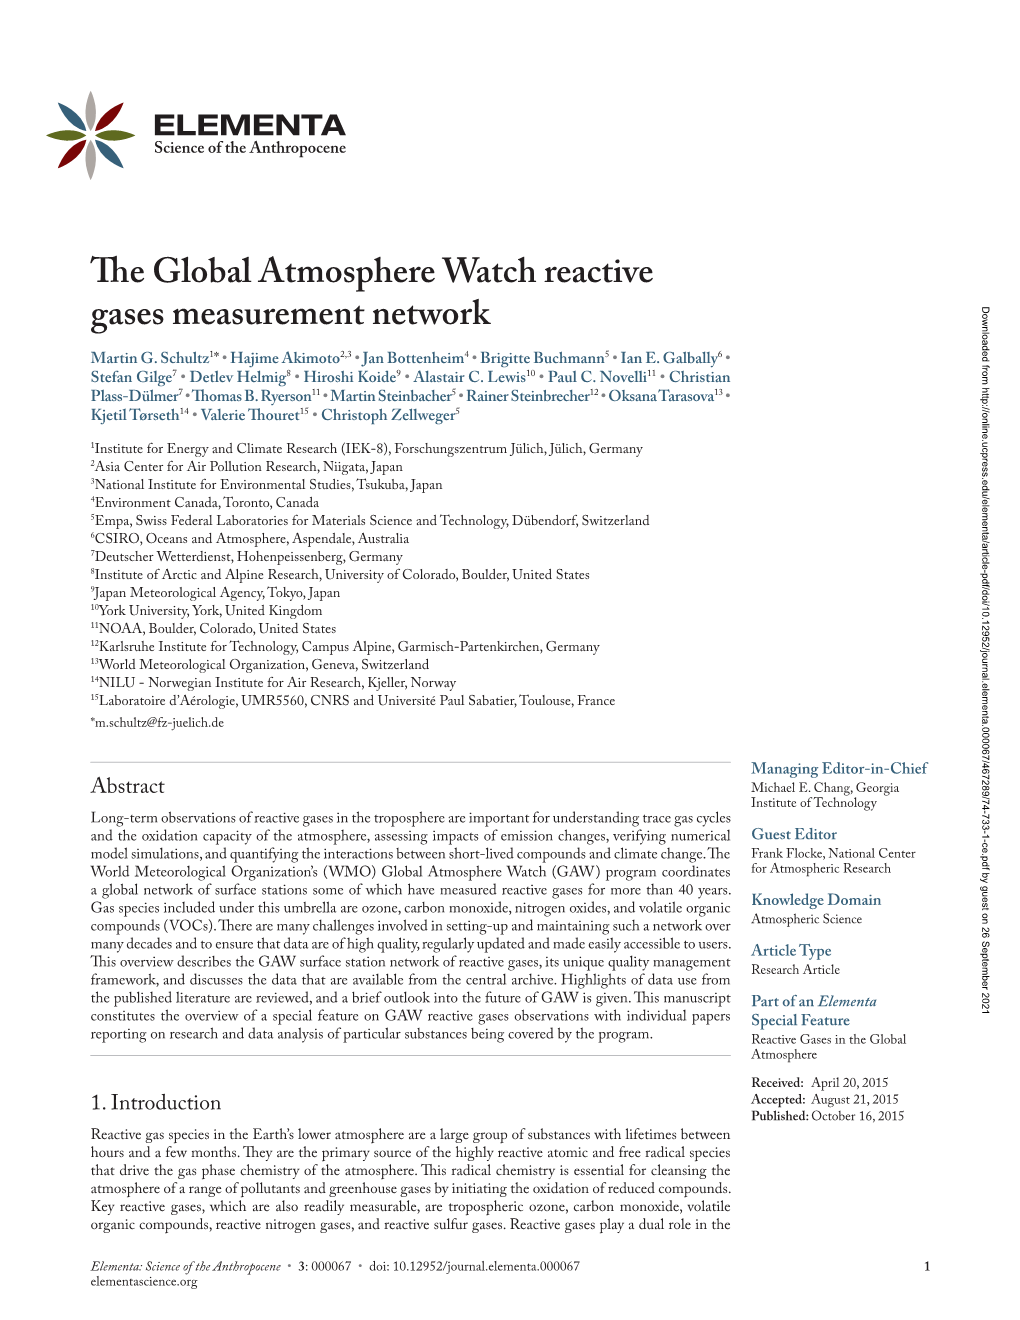 The Global Atmosphere Watch Reactive Gases Measurement Network